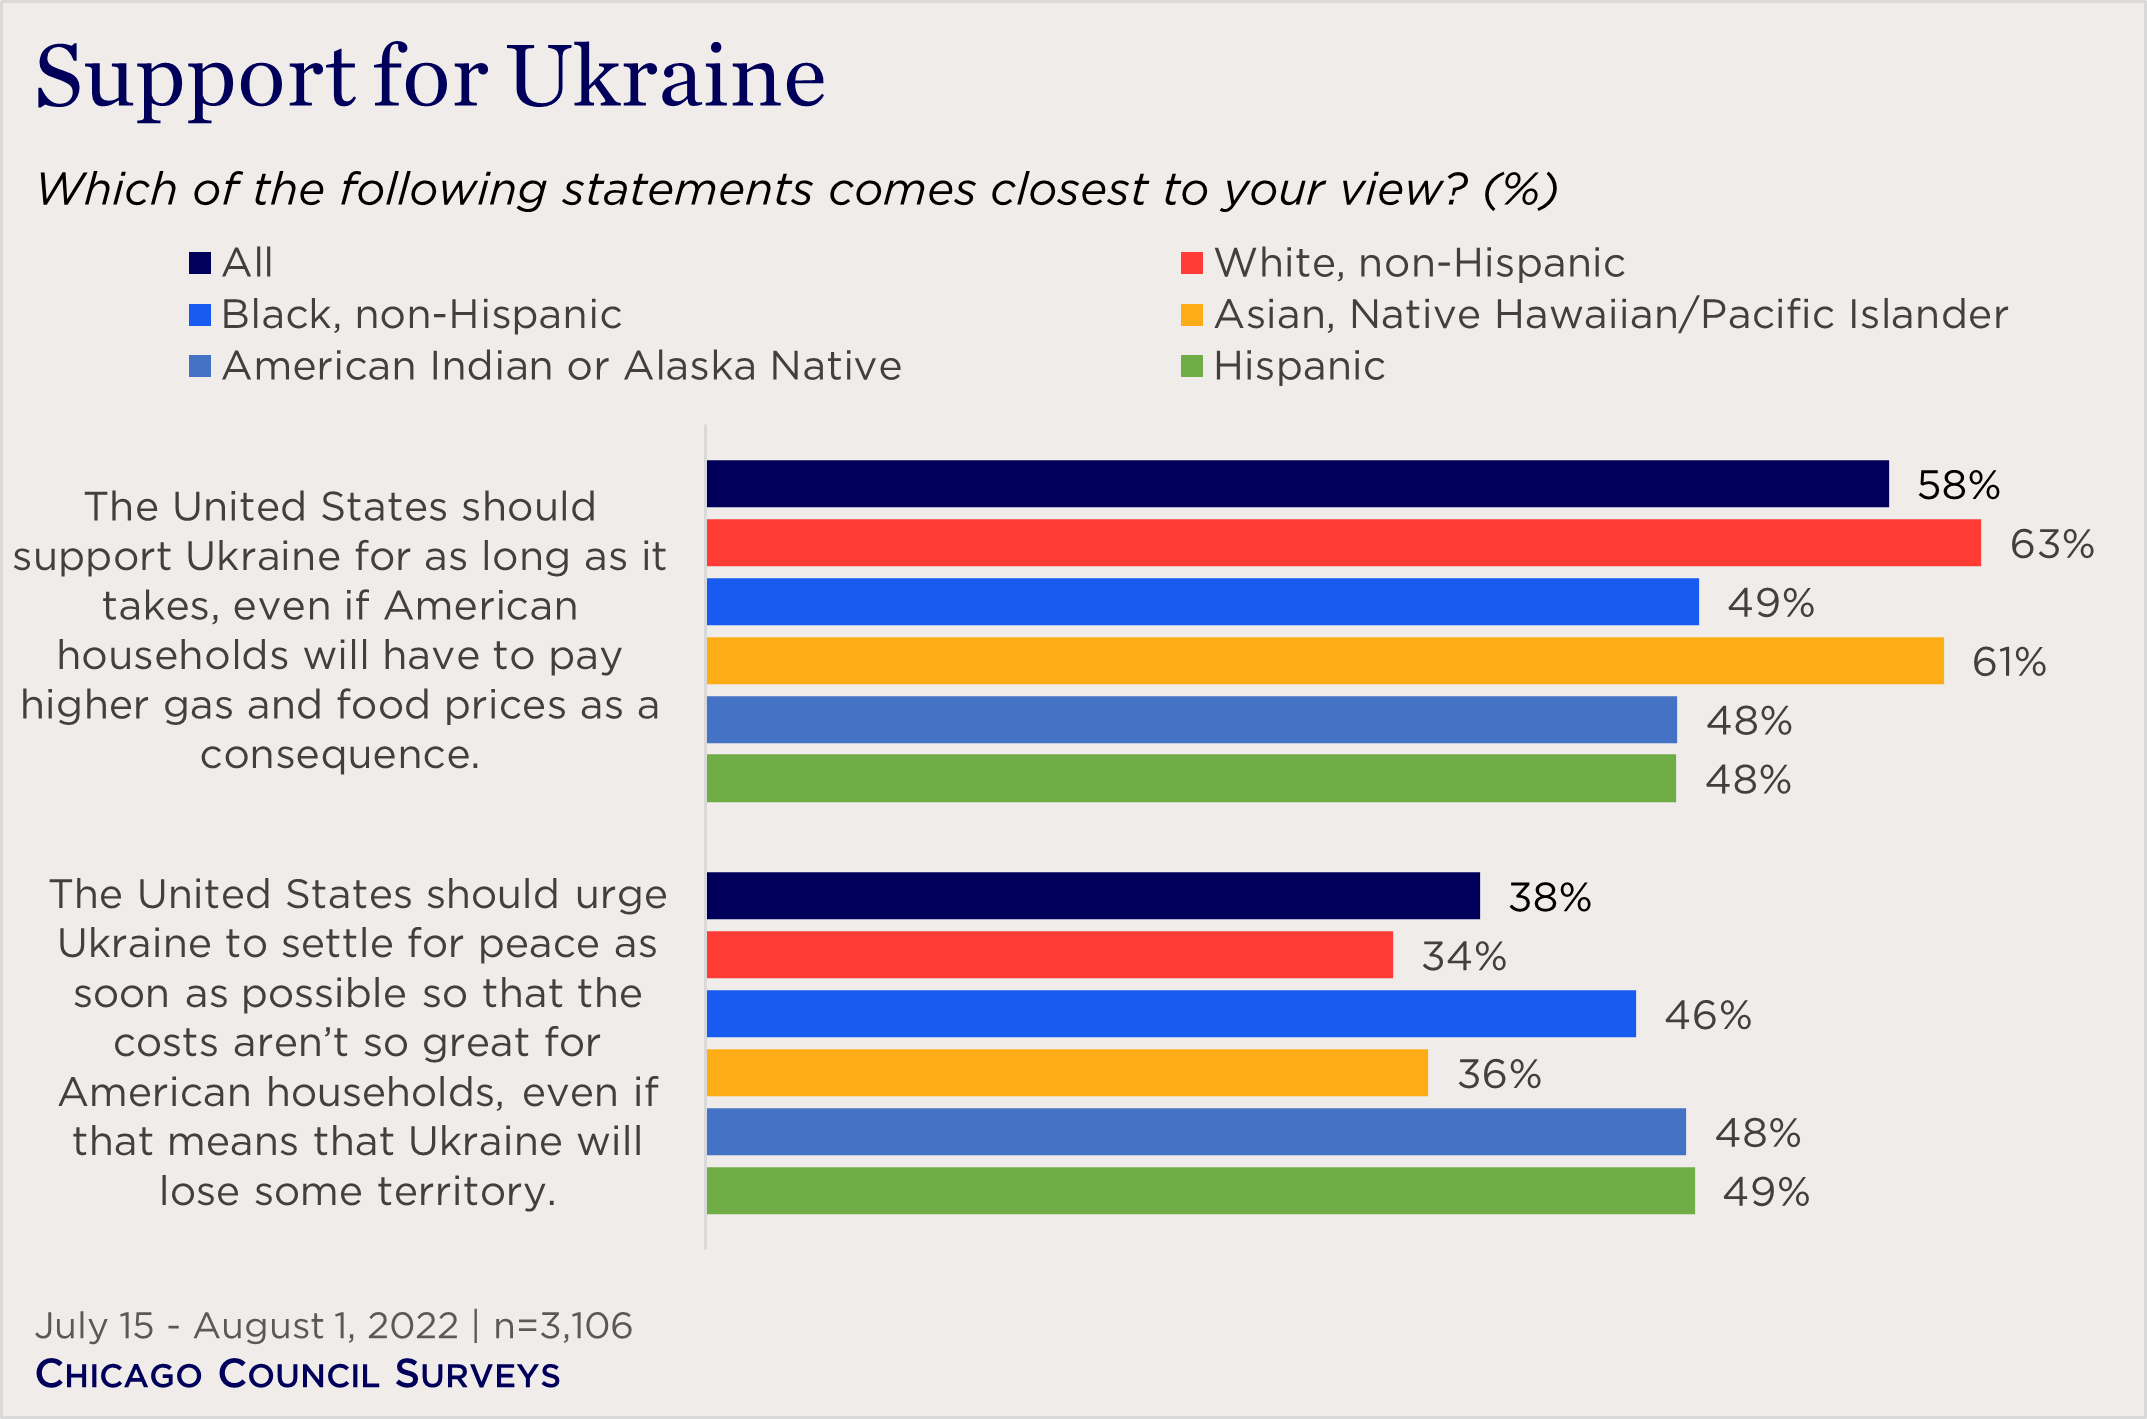 "bar chart showing support for Ukraine by race"